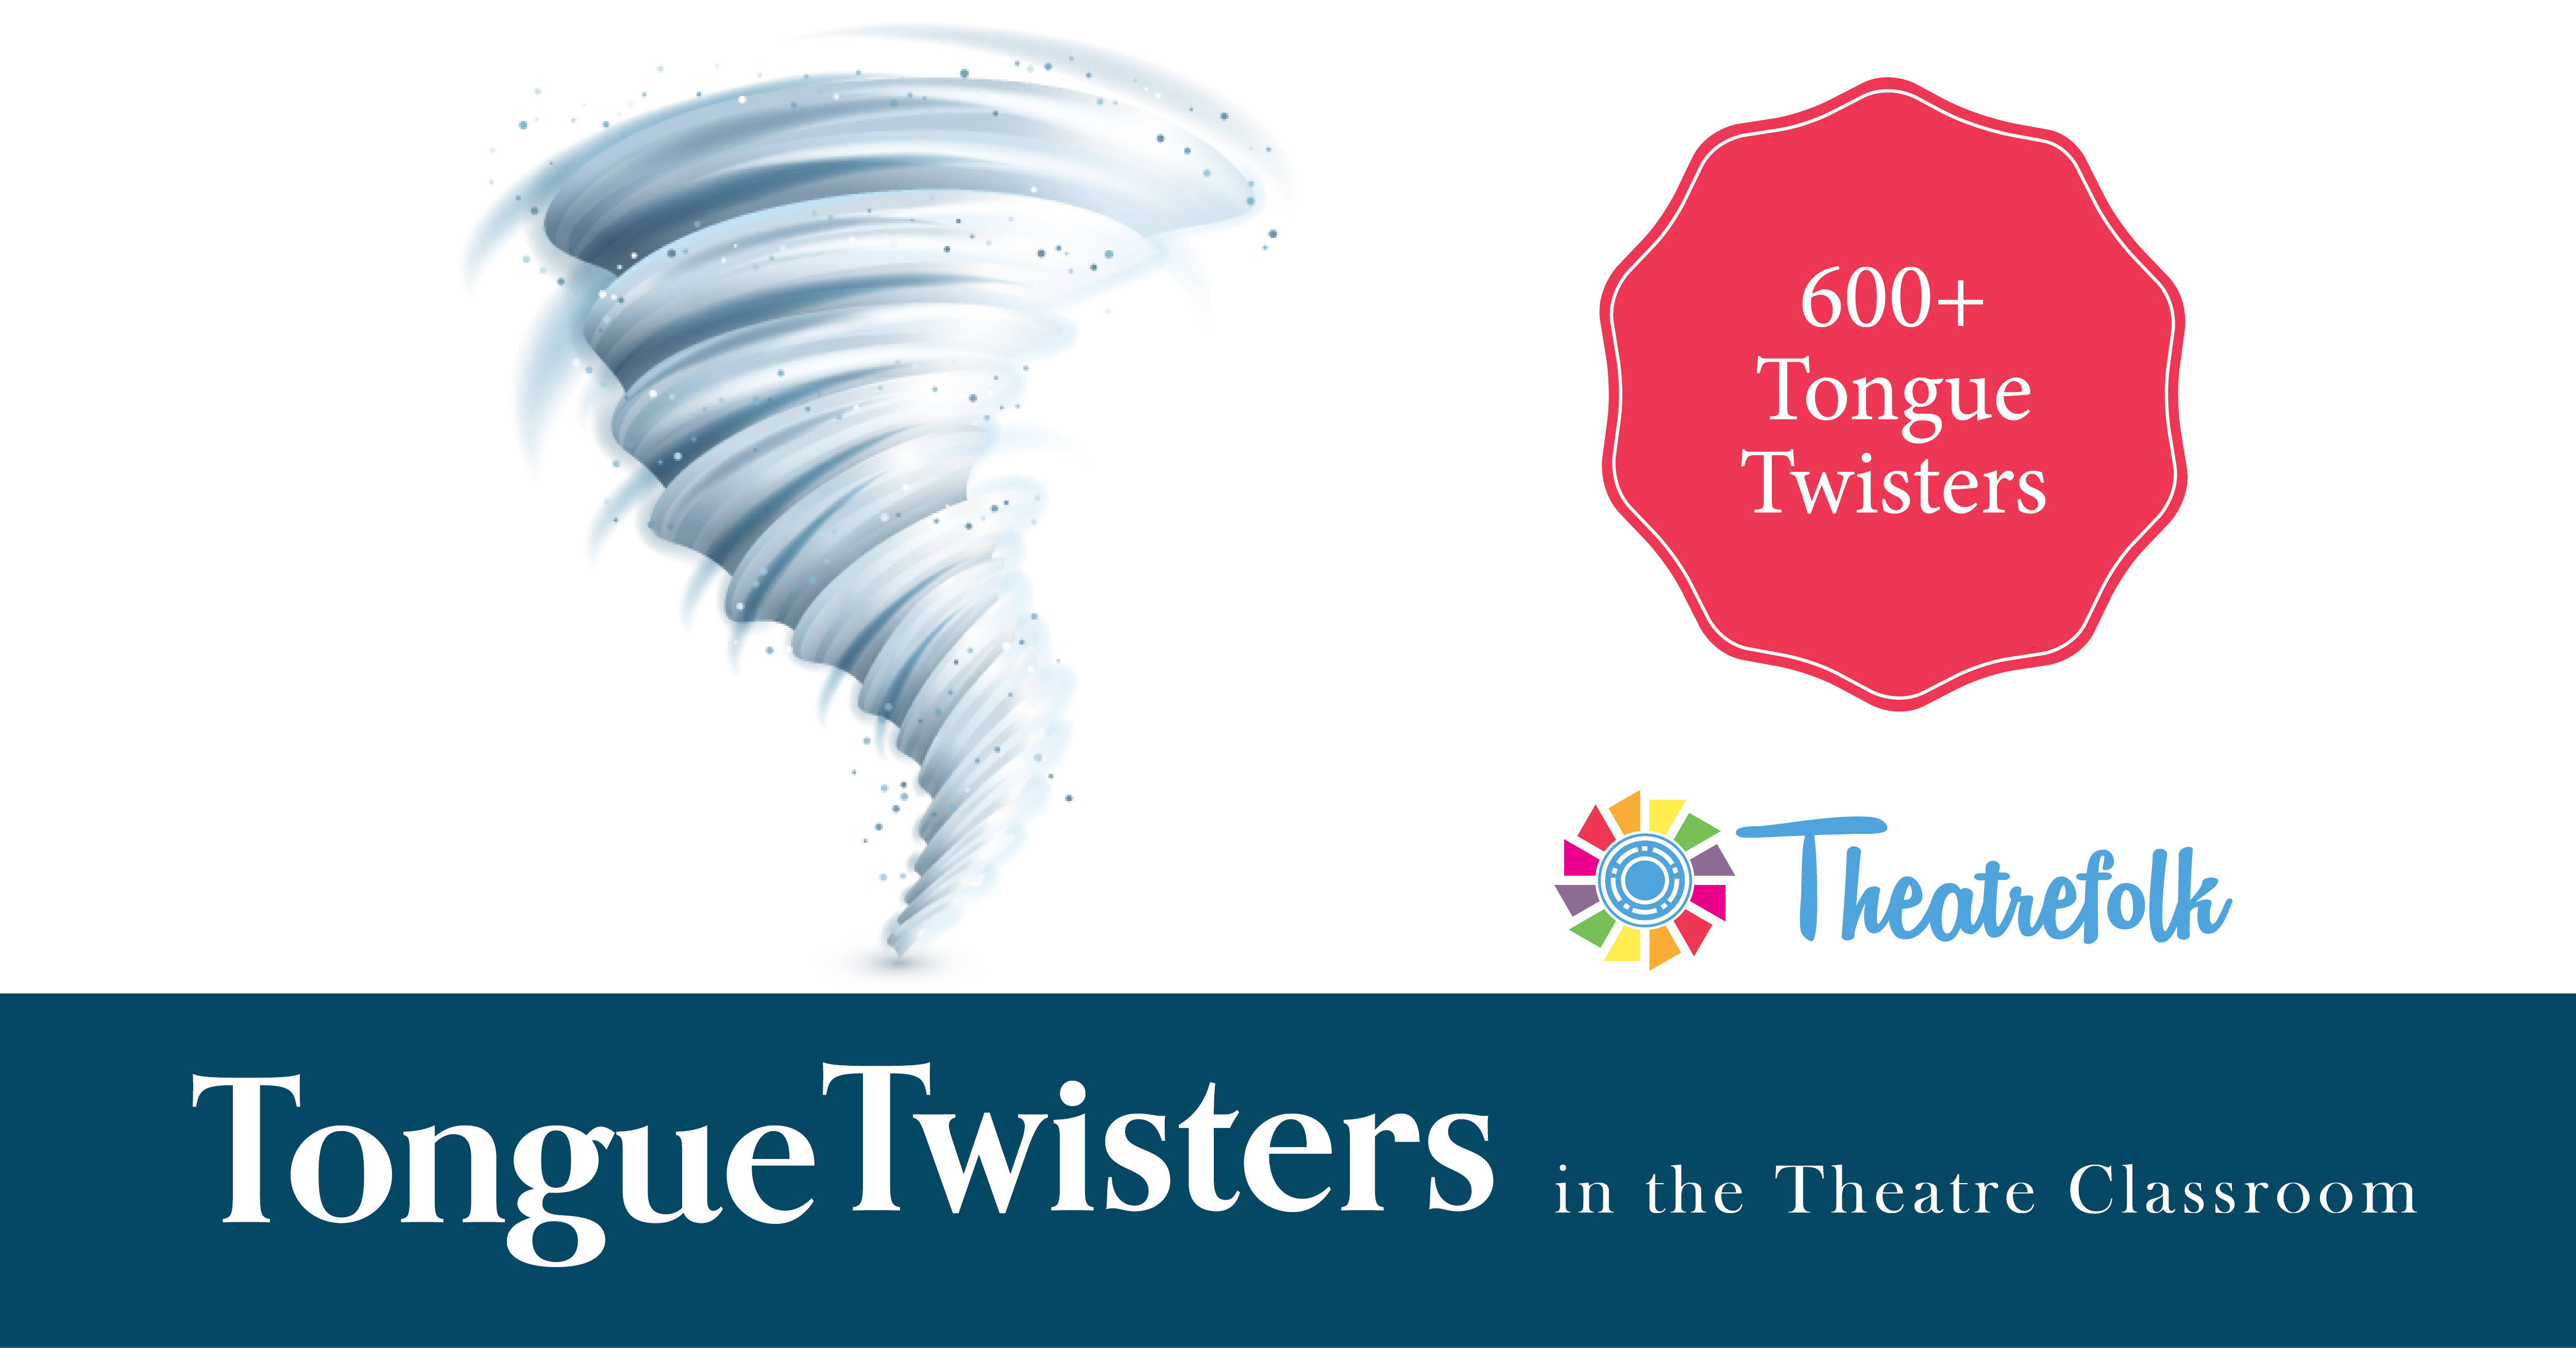 Tongue Twisters in the Theatre Classroom